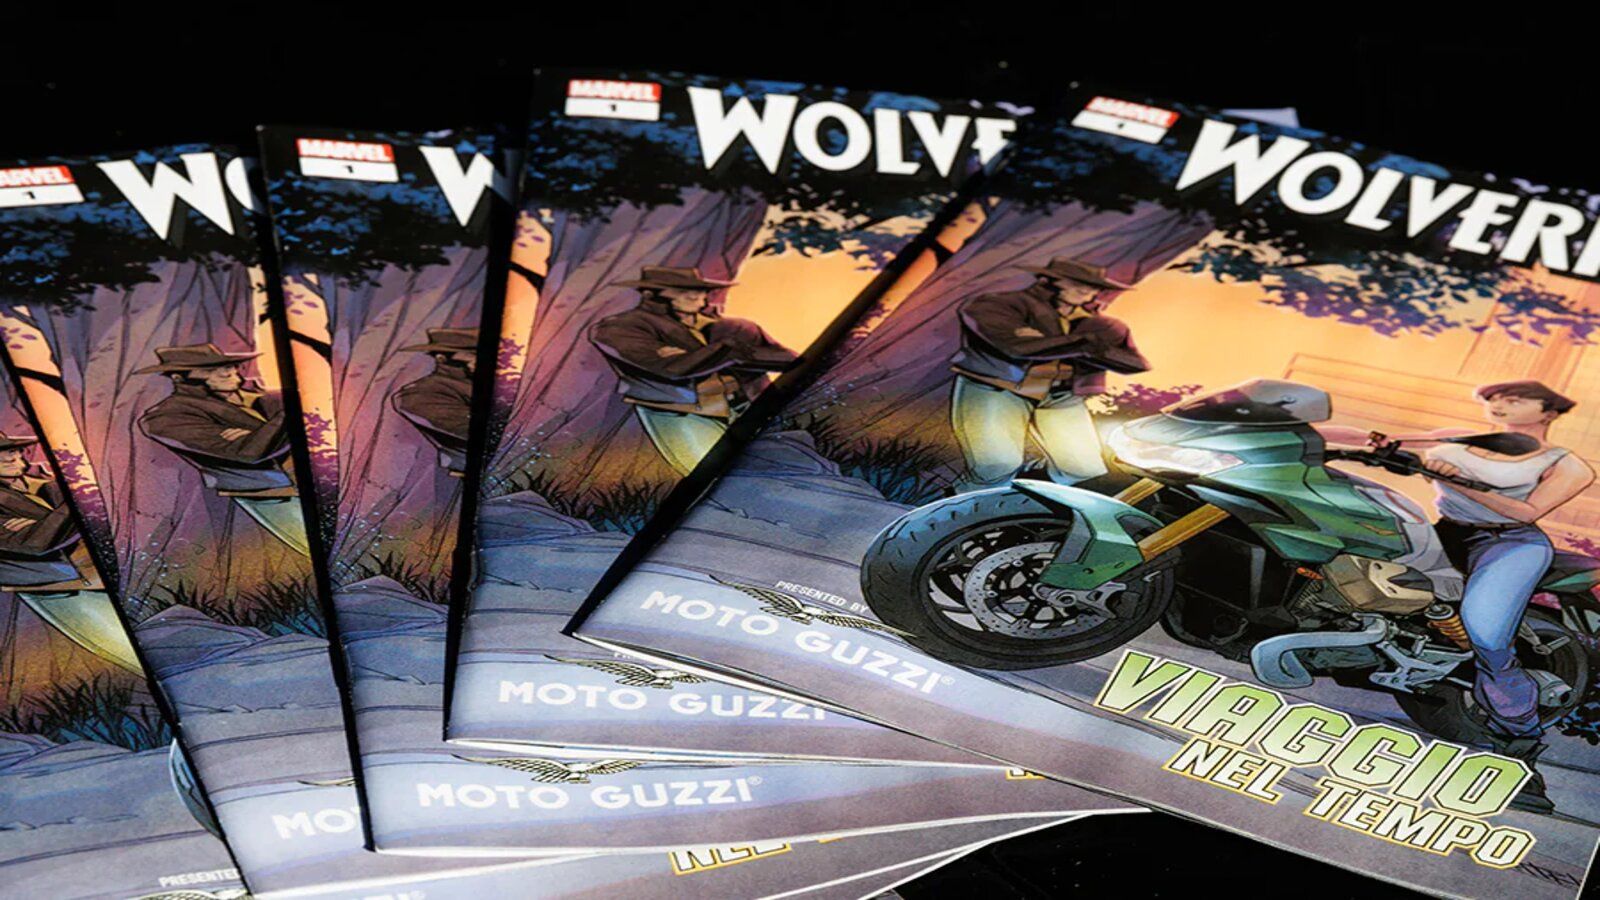 The new comic book produced by Marvel and Moto Guzzi